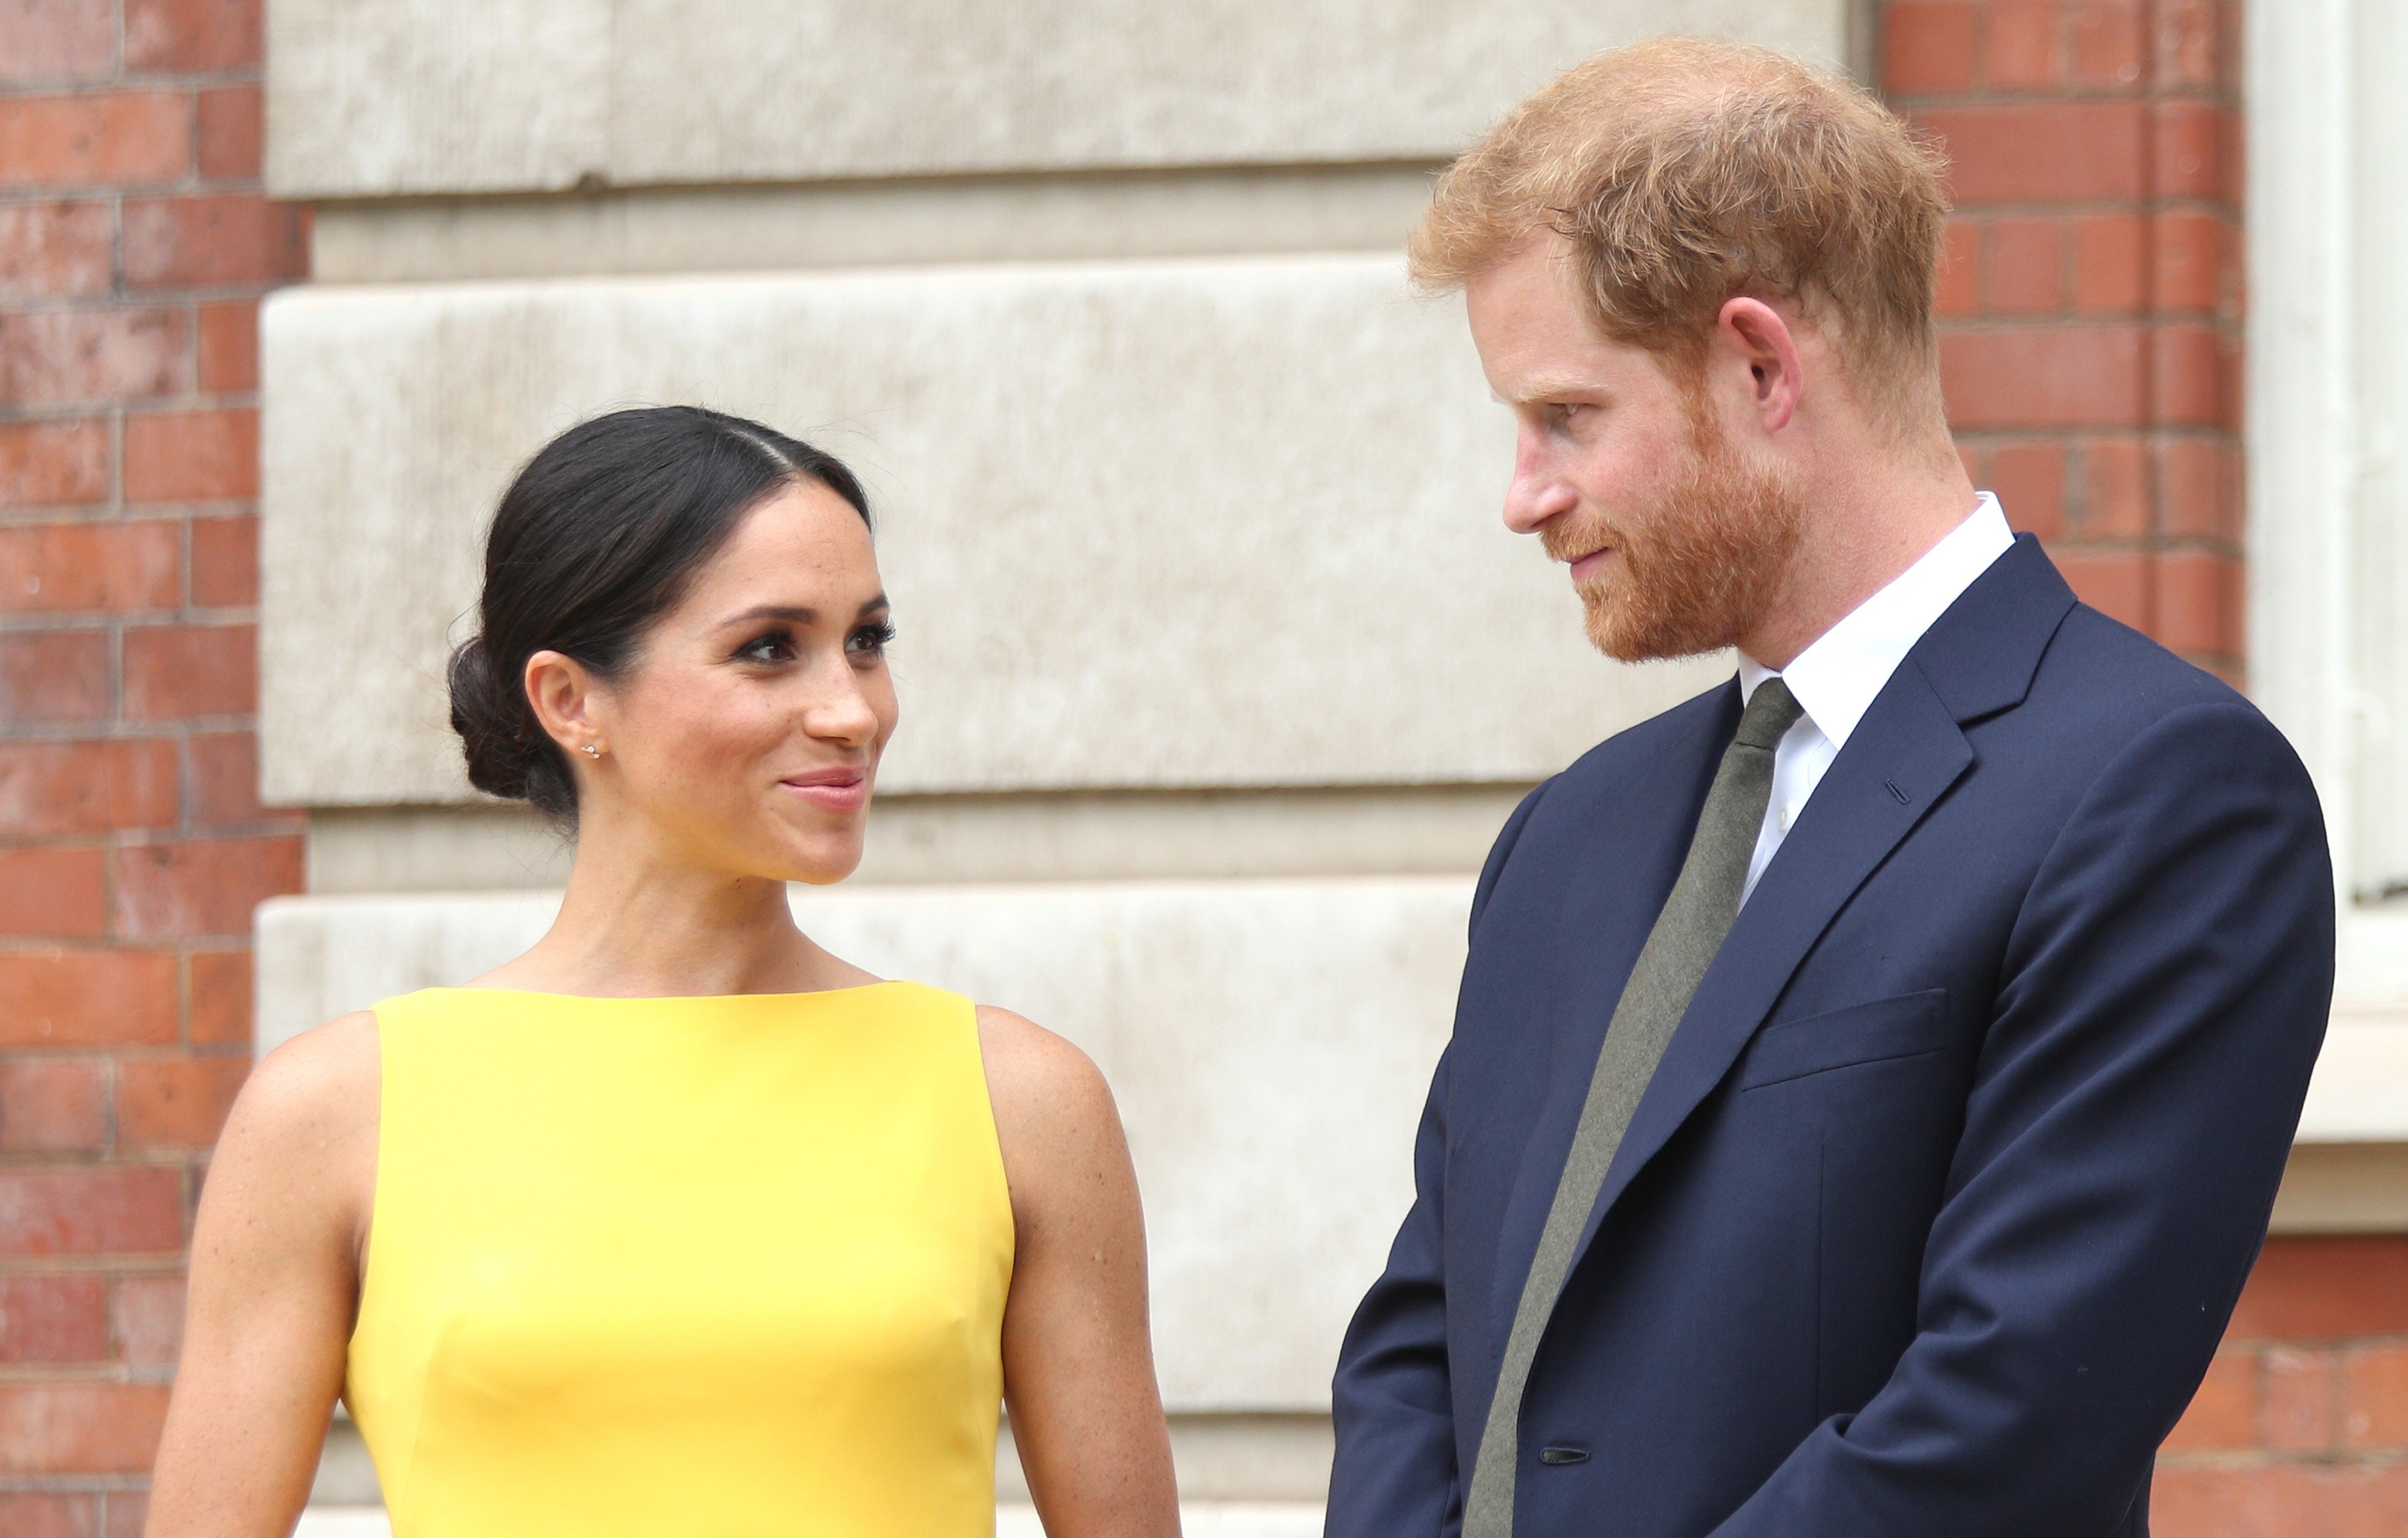 Meghan Markle dressed in yellow and Prince Harry in a navy suit at Commonwealth Youth Challenge reception